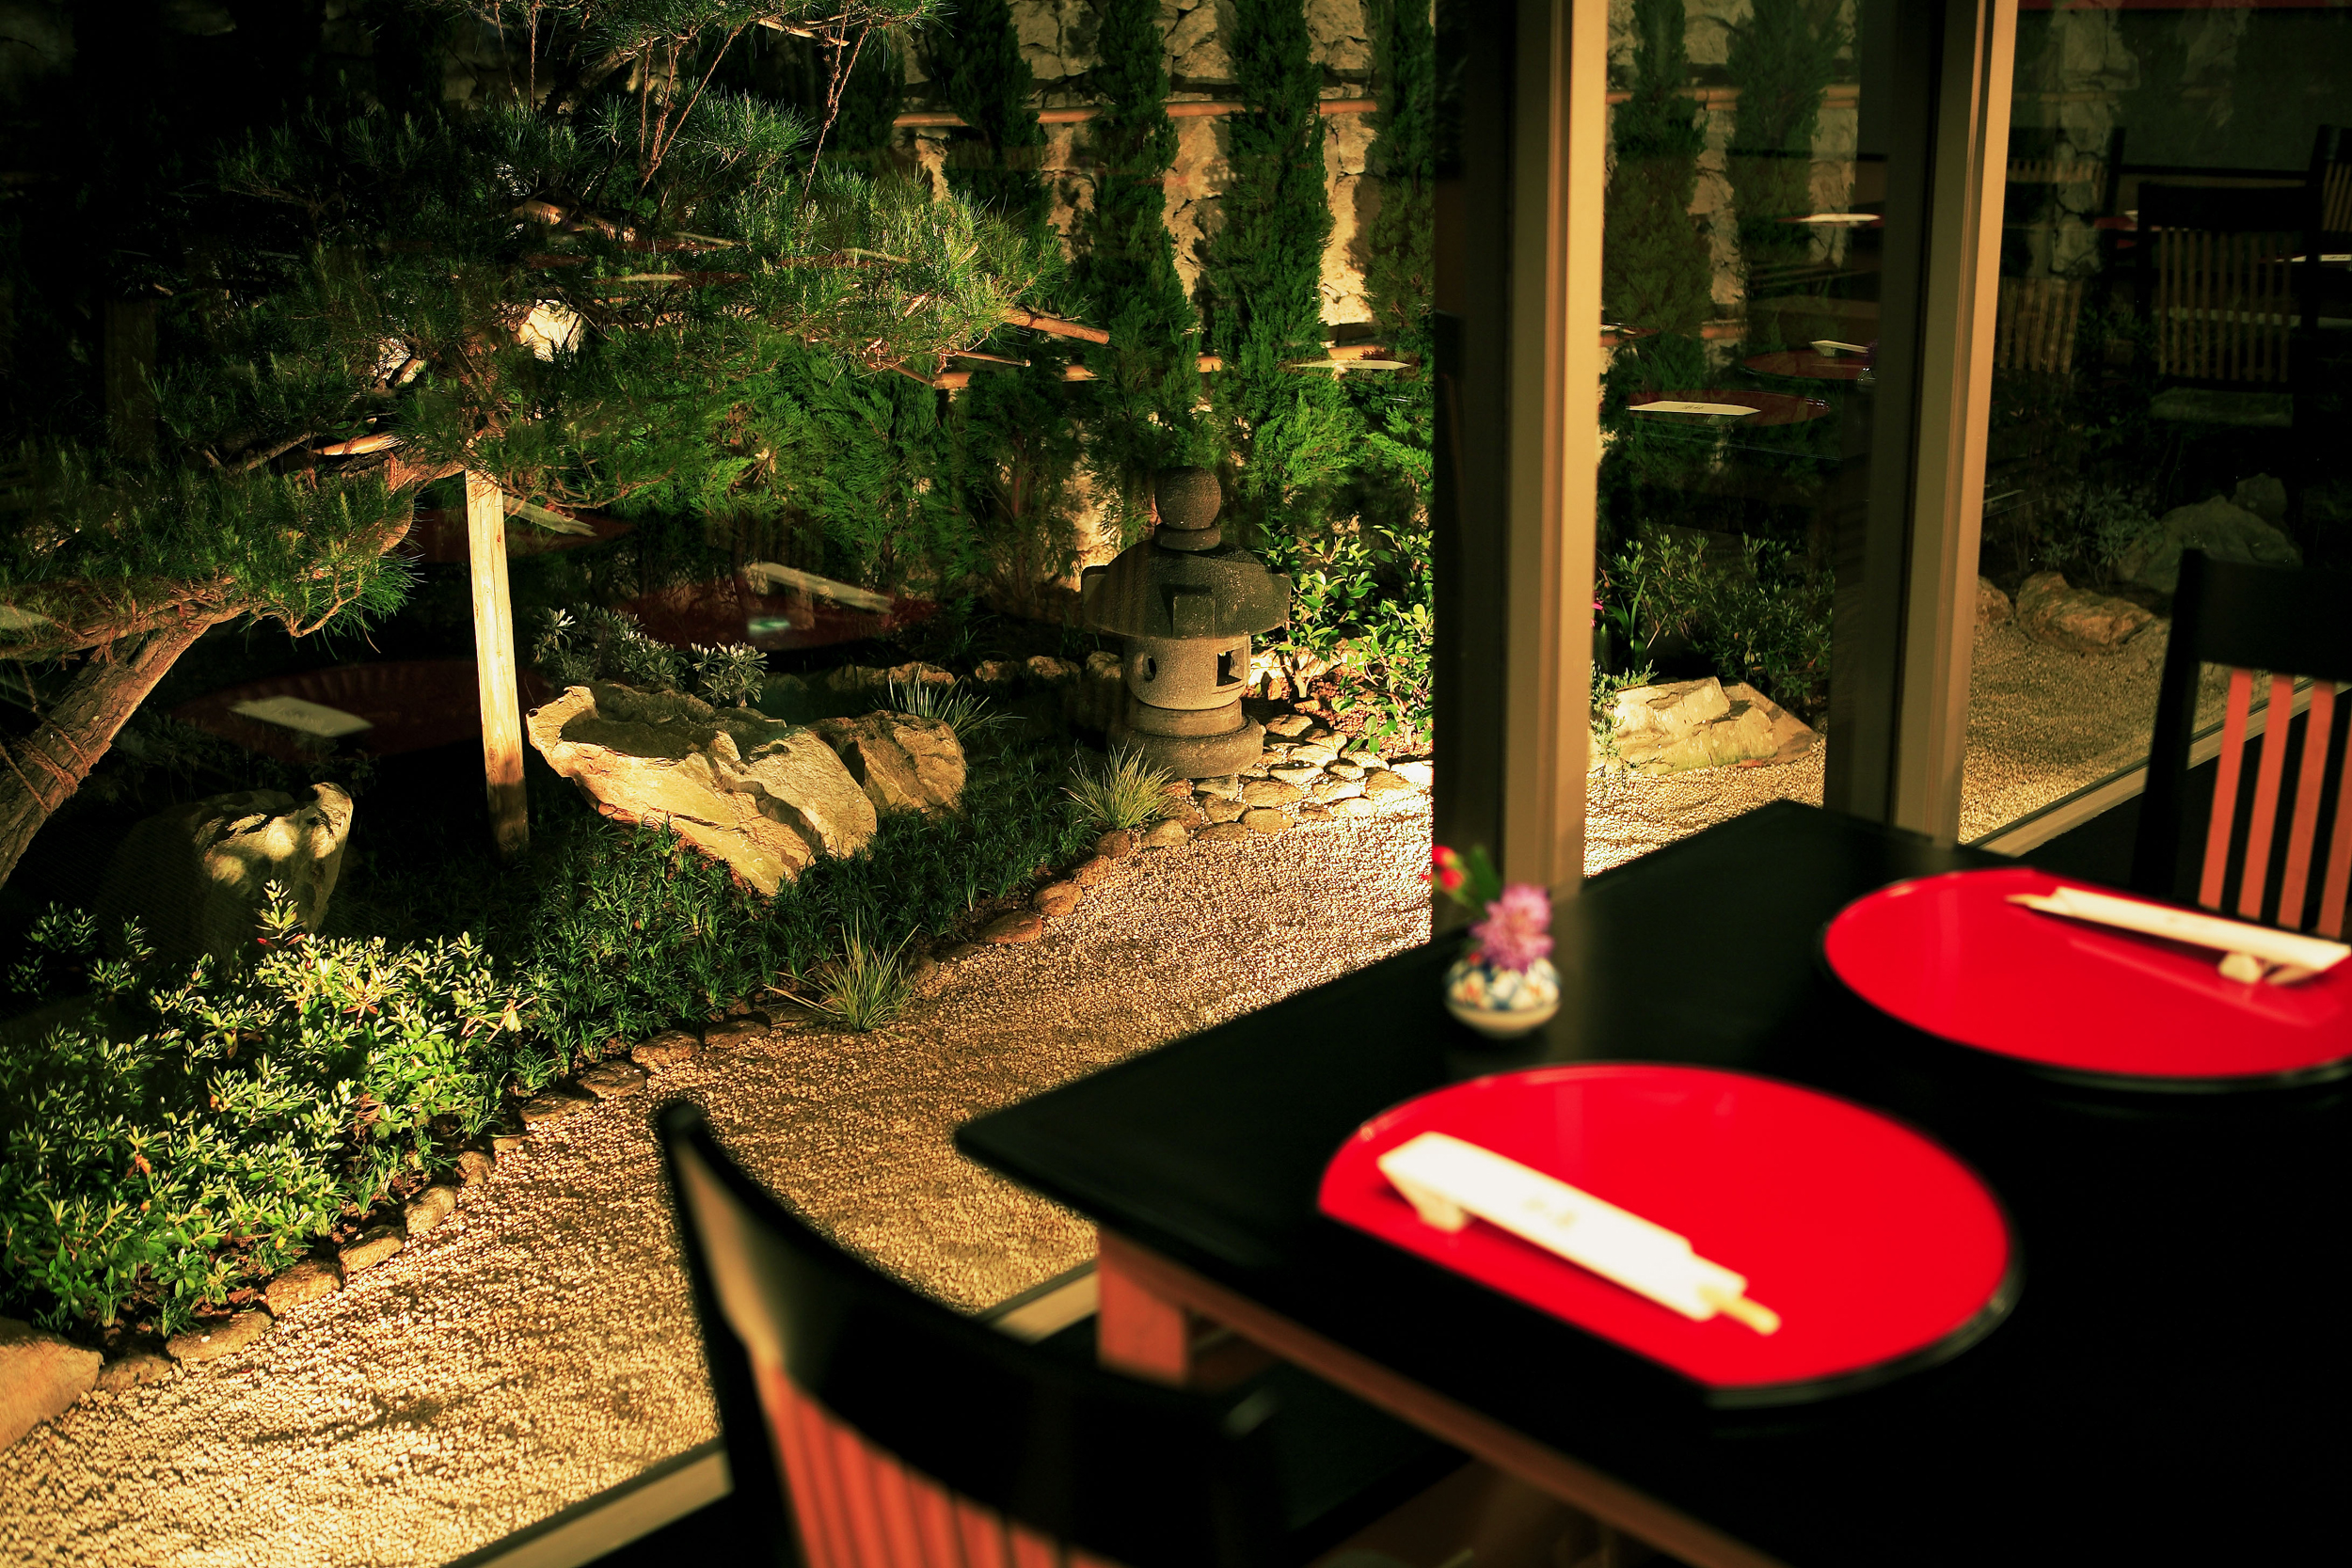 Izumi / Seasonal Japanese cuisine] <br/>Eye-catching image of a relaxing dinner time at a hotel.